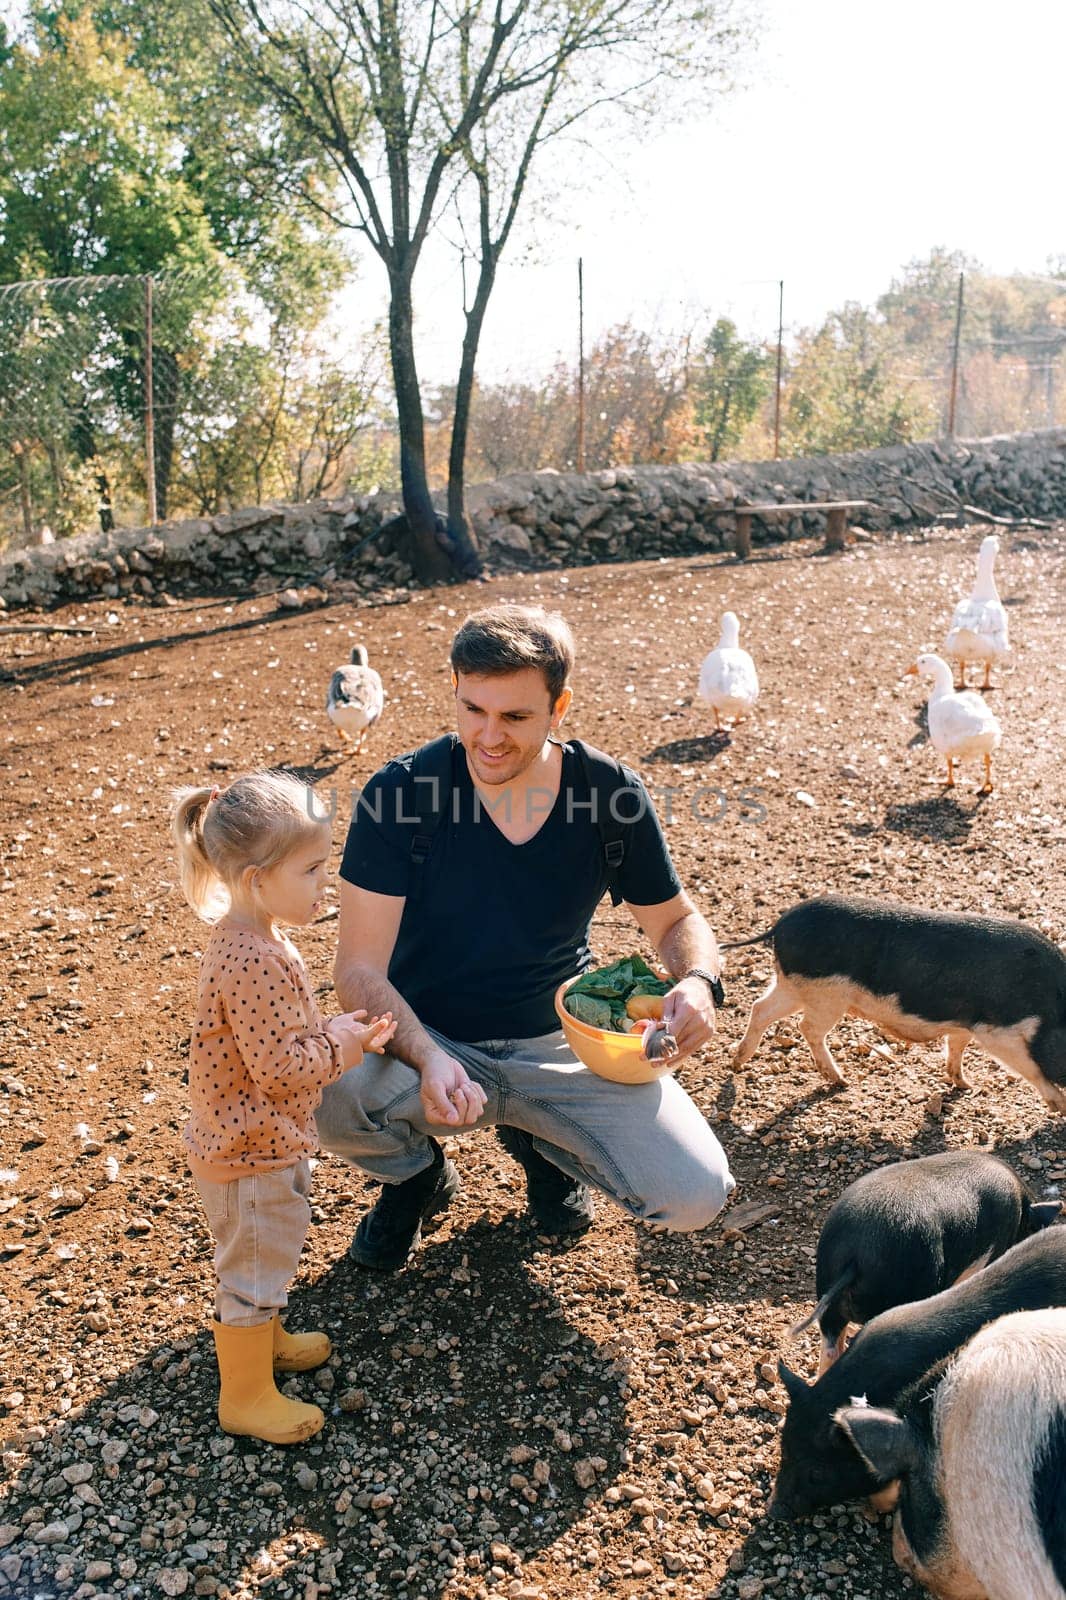 Dad squats near a little girl with a bowl and feeds fluffy piglets by Nadtochiy